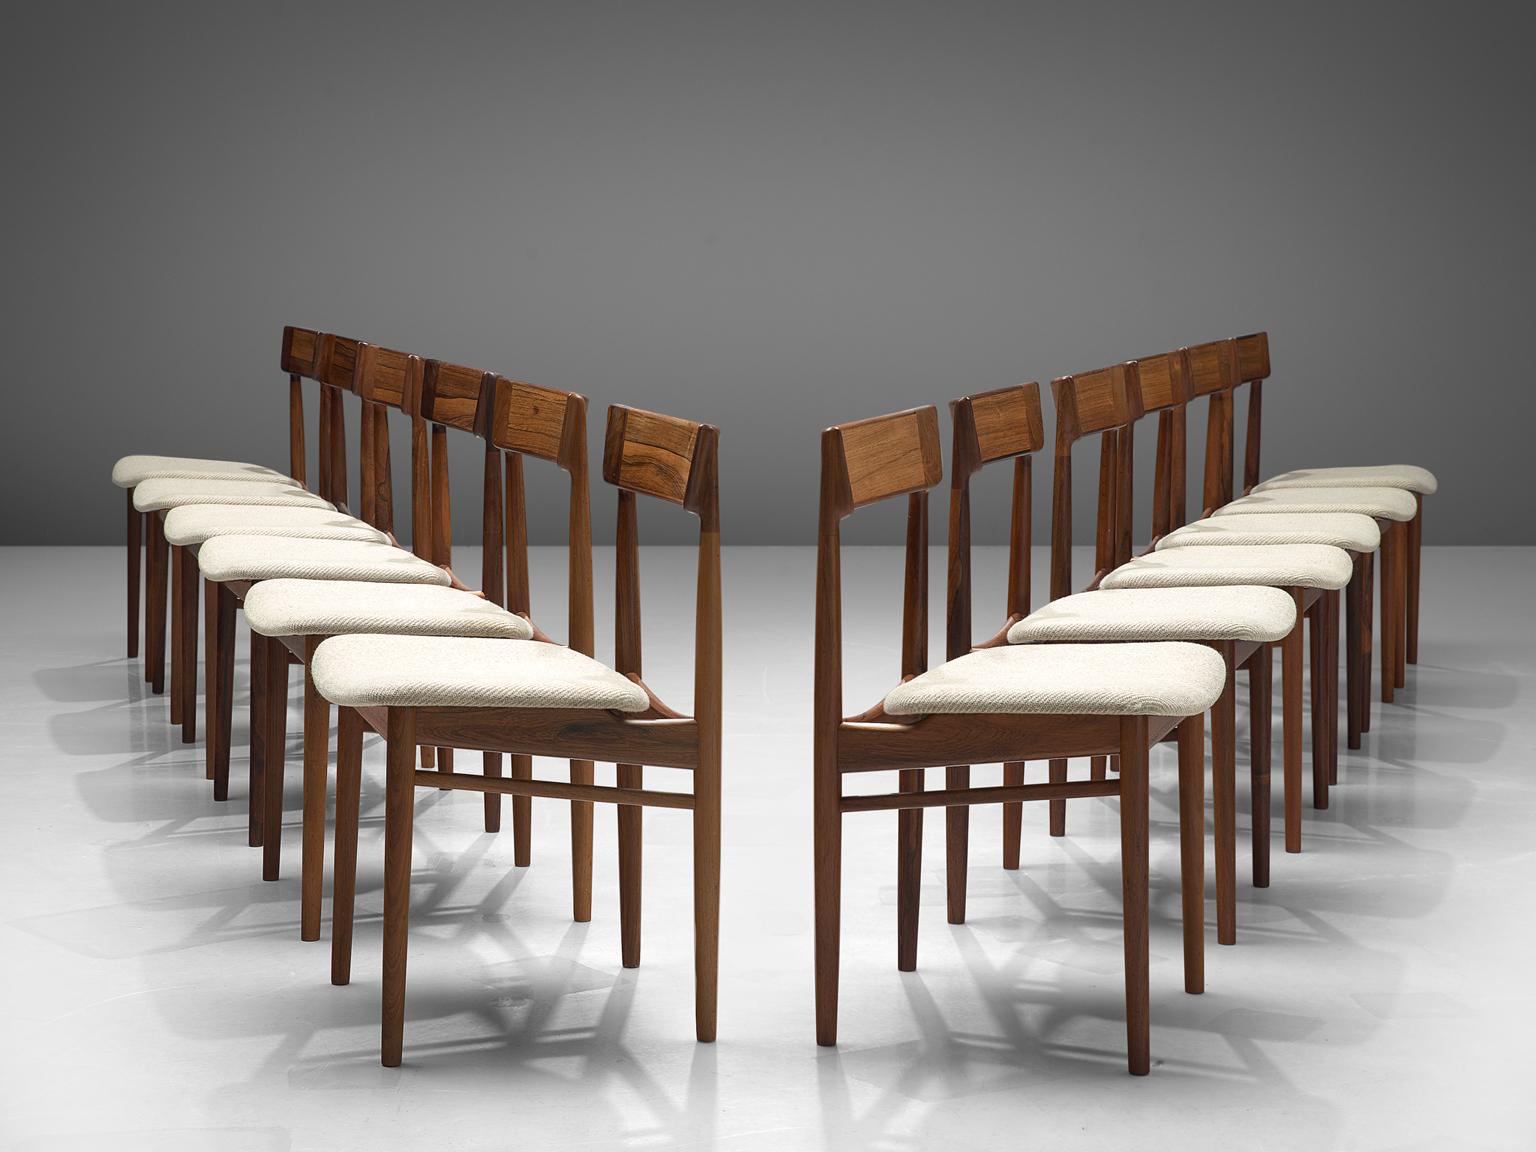 Henry Rosengren Hansen, 12 dining chairs model 39, rosewood and fabric, Denmark, 1960s.

This wonderful crafted set of twelve dining chairs feature a solid rosewood frame. Danish designer Rosengren Hansen is known for high quality and very refined